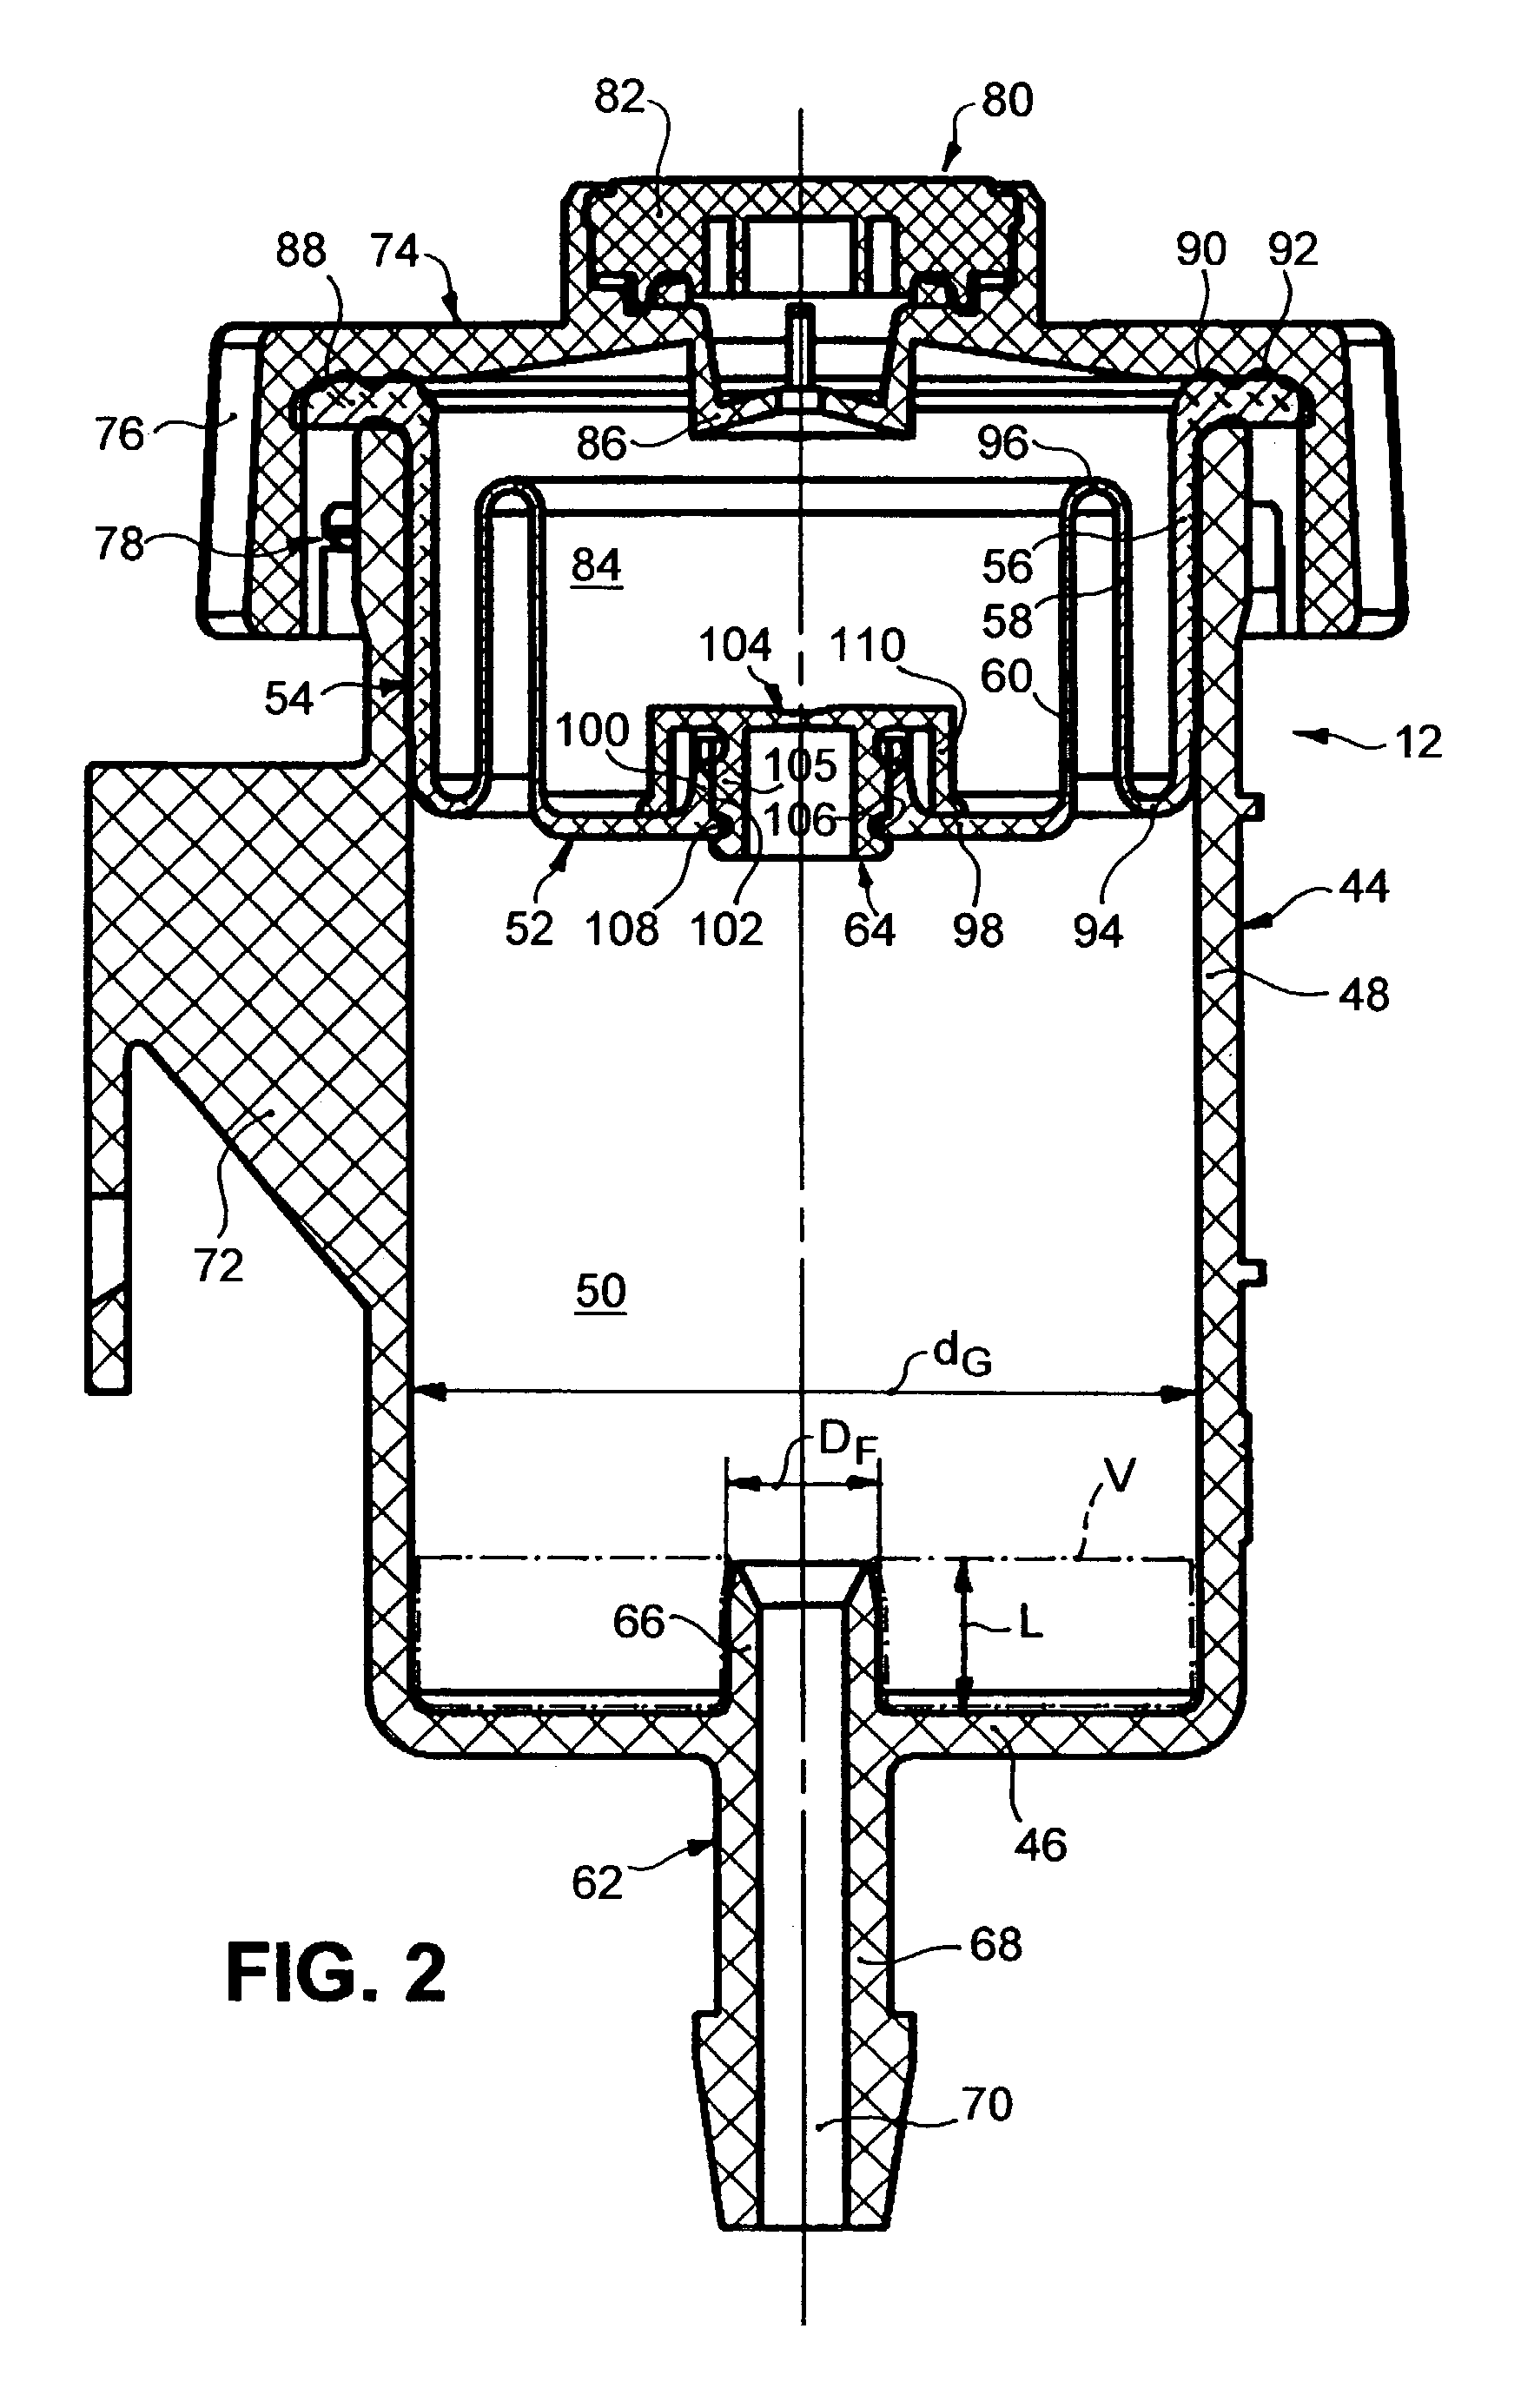 Expansion reservoir for a master cylinder of a hydraulic force transmission system